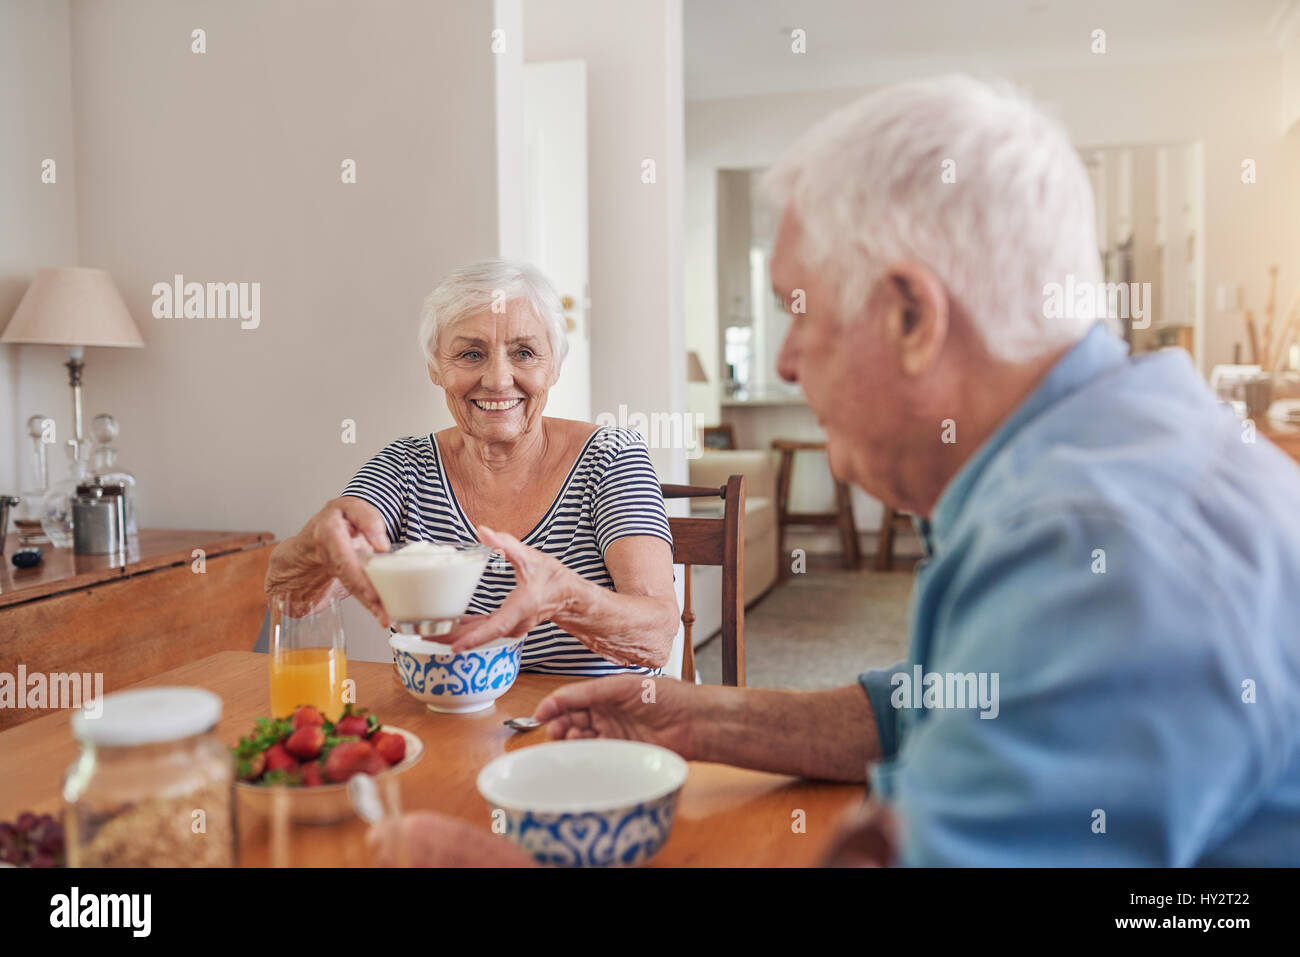 Content seniors eating a healthy breakfast together at home Stock Photo